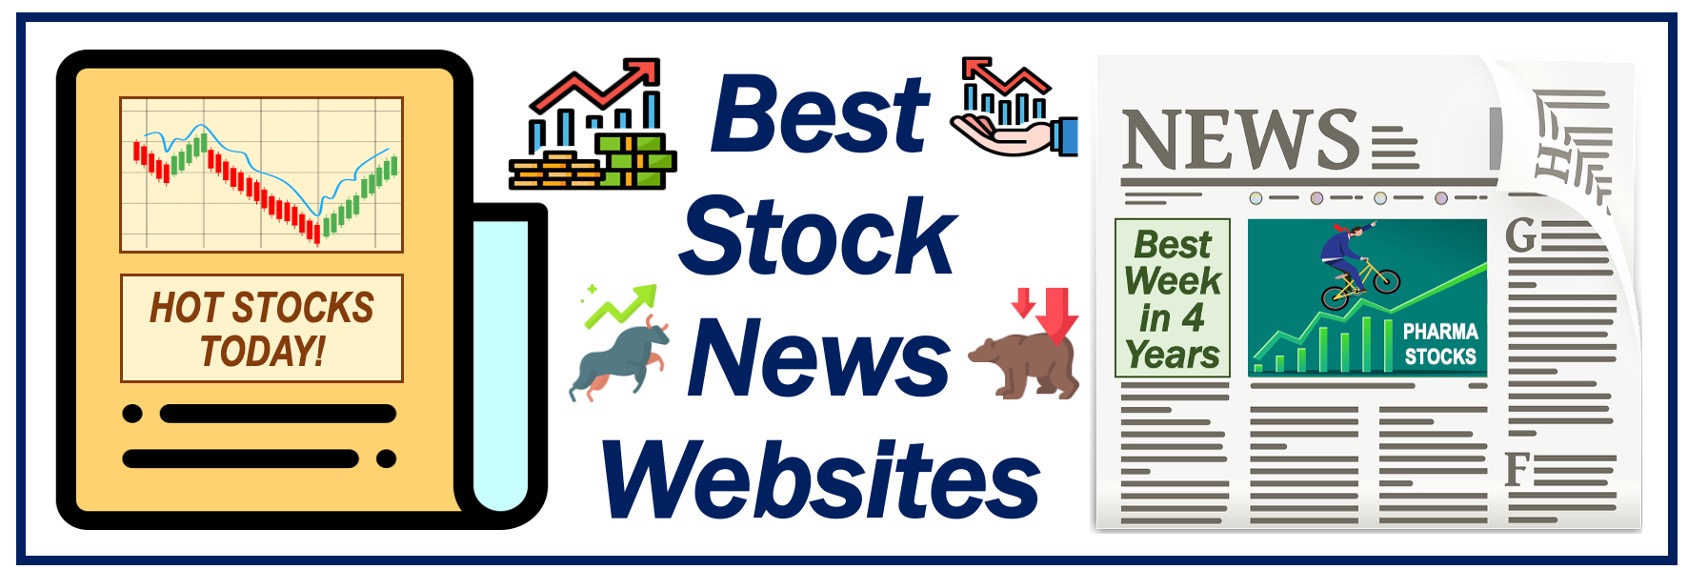 Best stock news websites - image for article